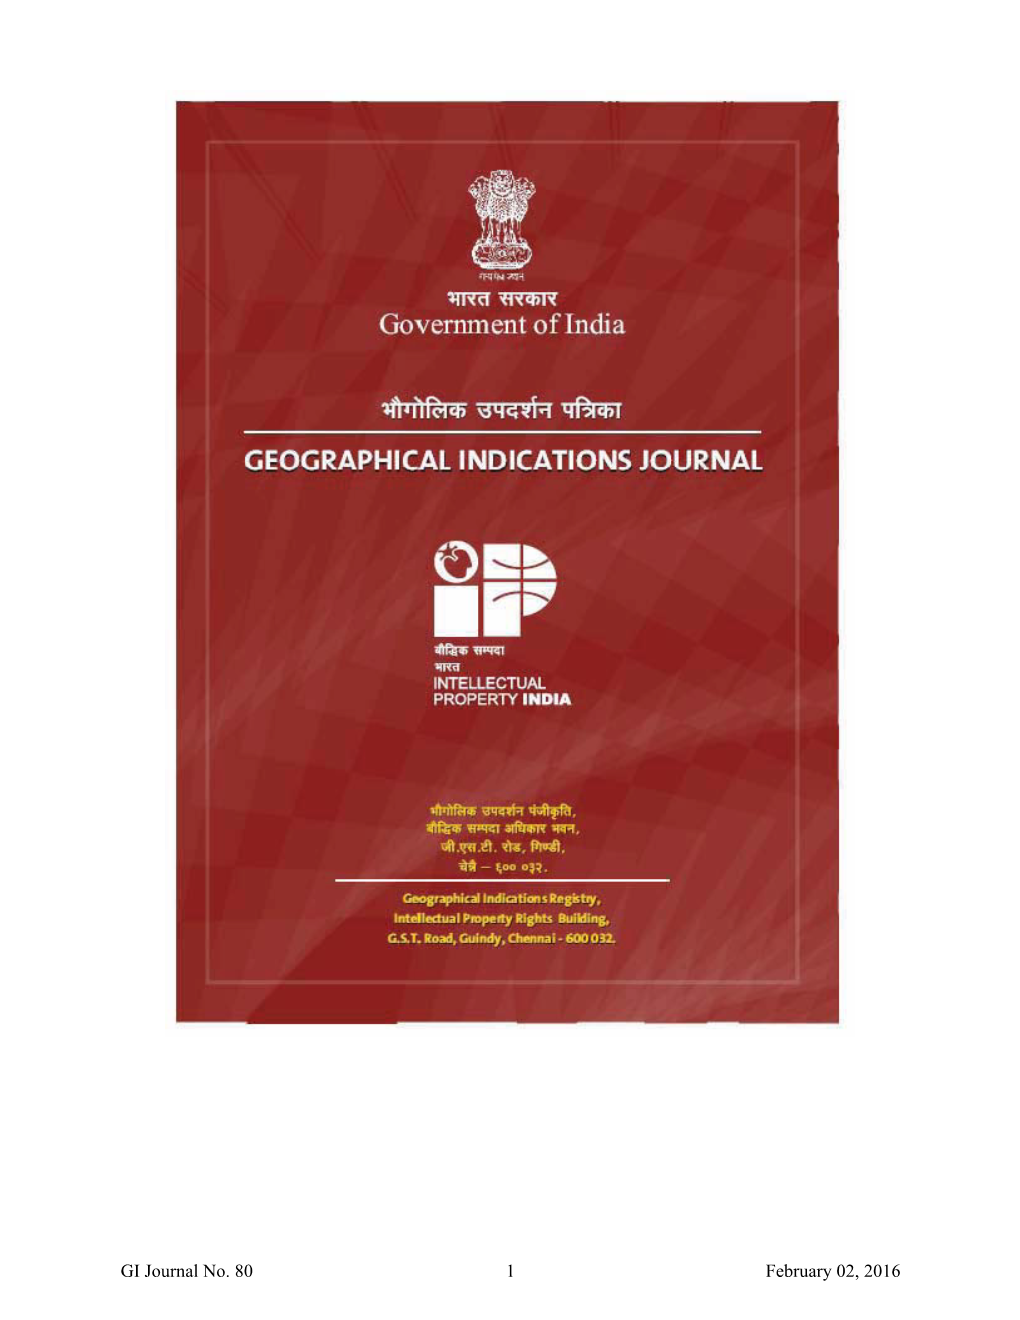 Government of India Geographical Indications Journal No.80